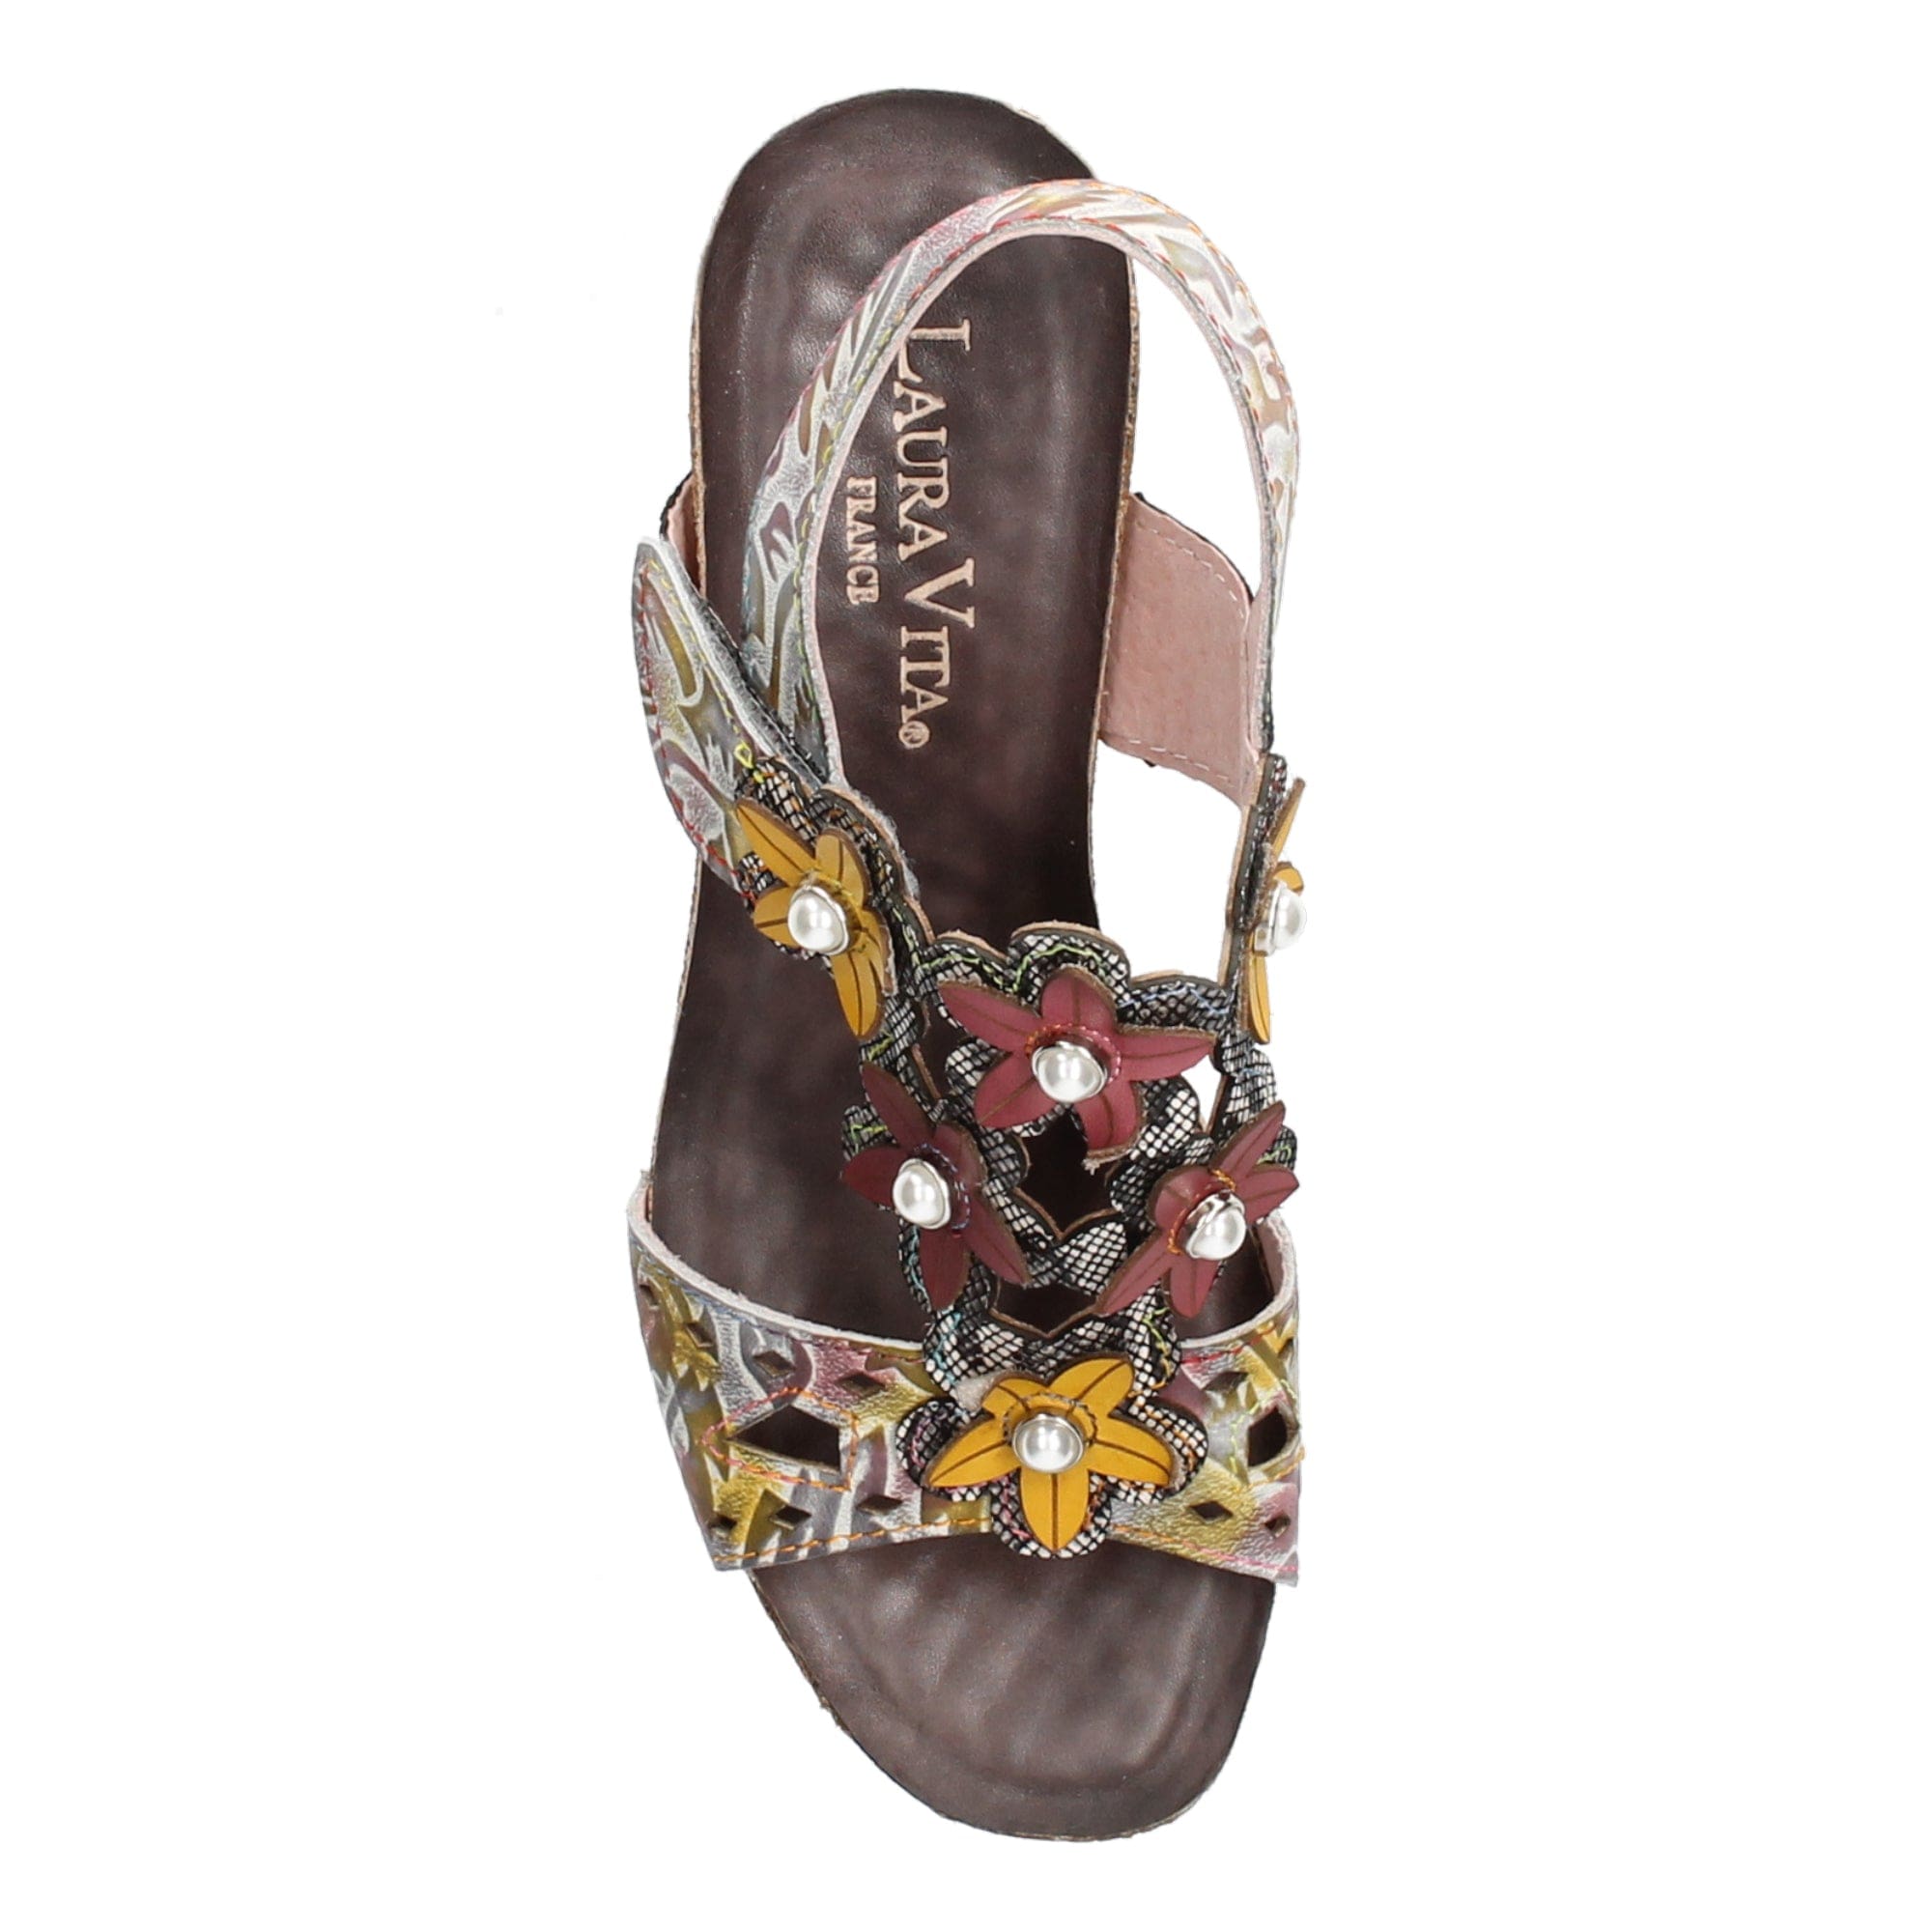 HACDEO 01 Shoes - Sandal